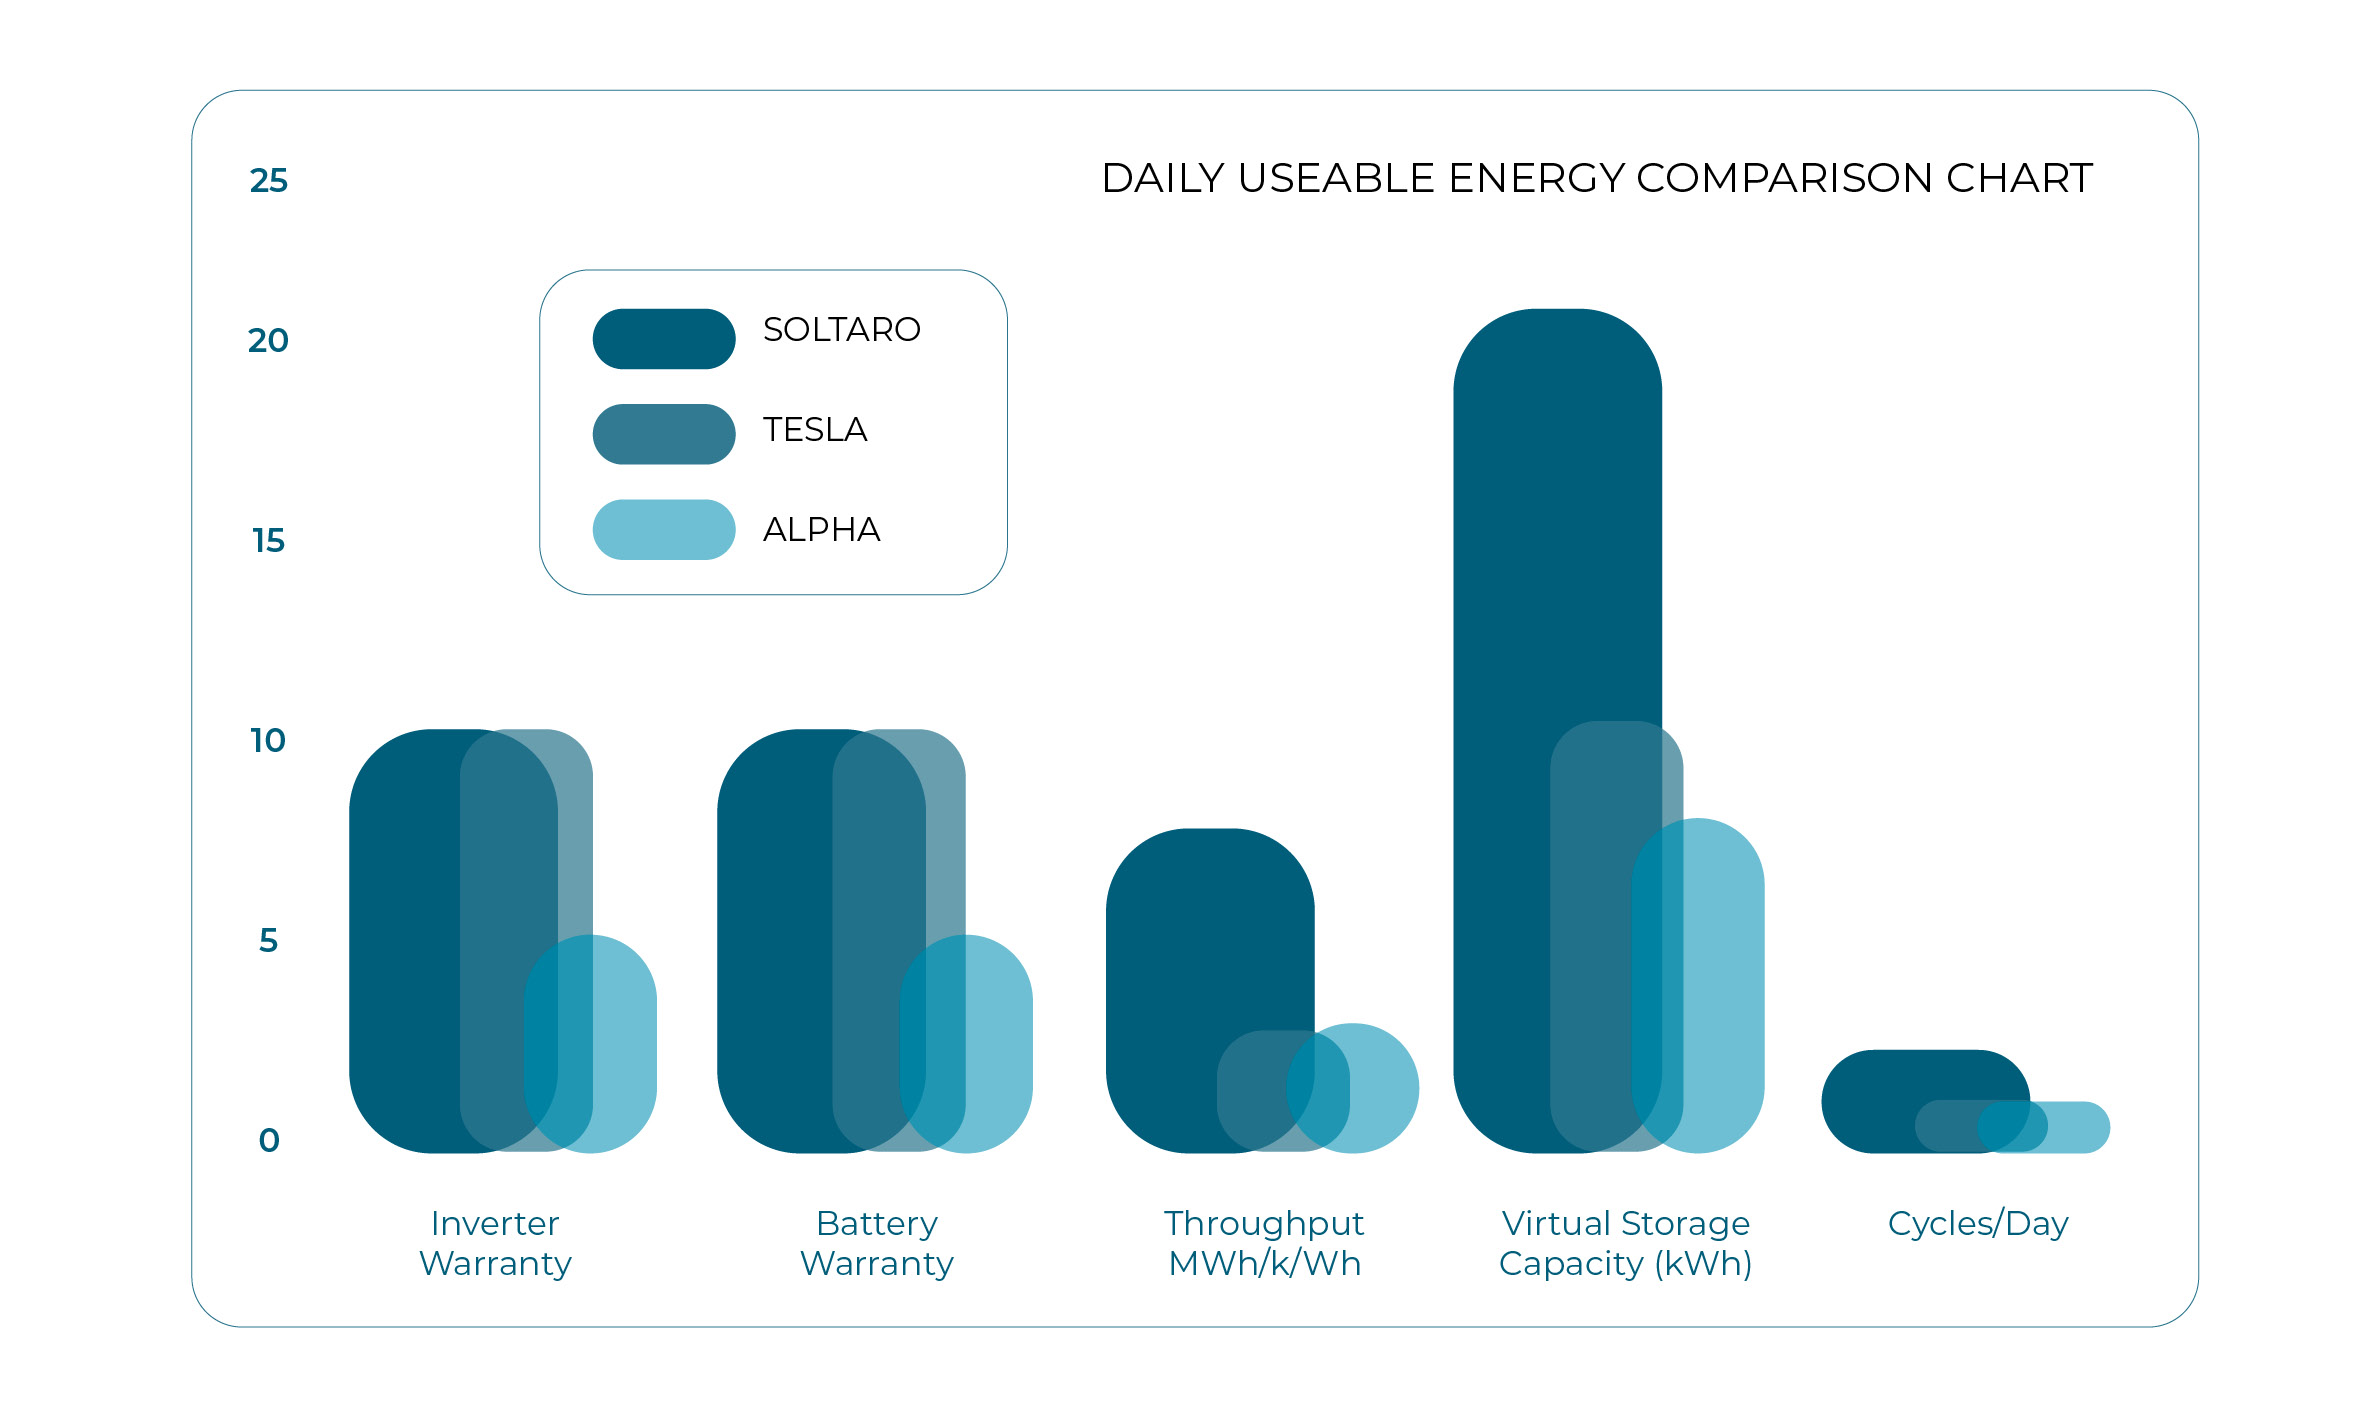 DAILY USEABLE ENERGY COMPARISON CHART